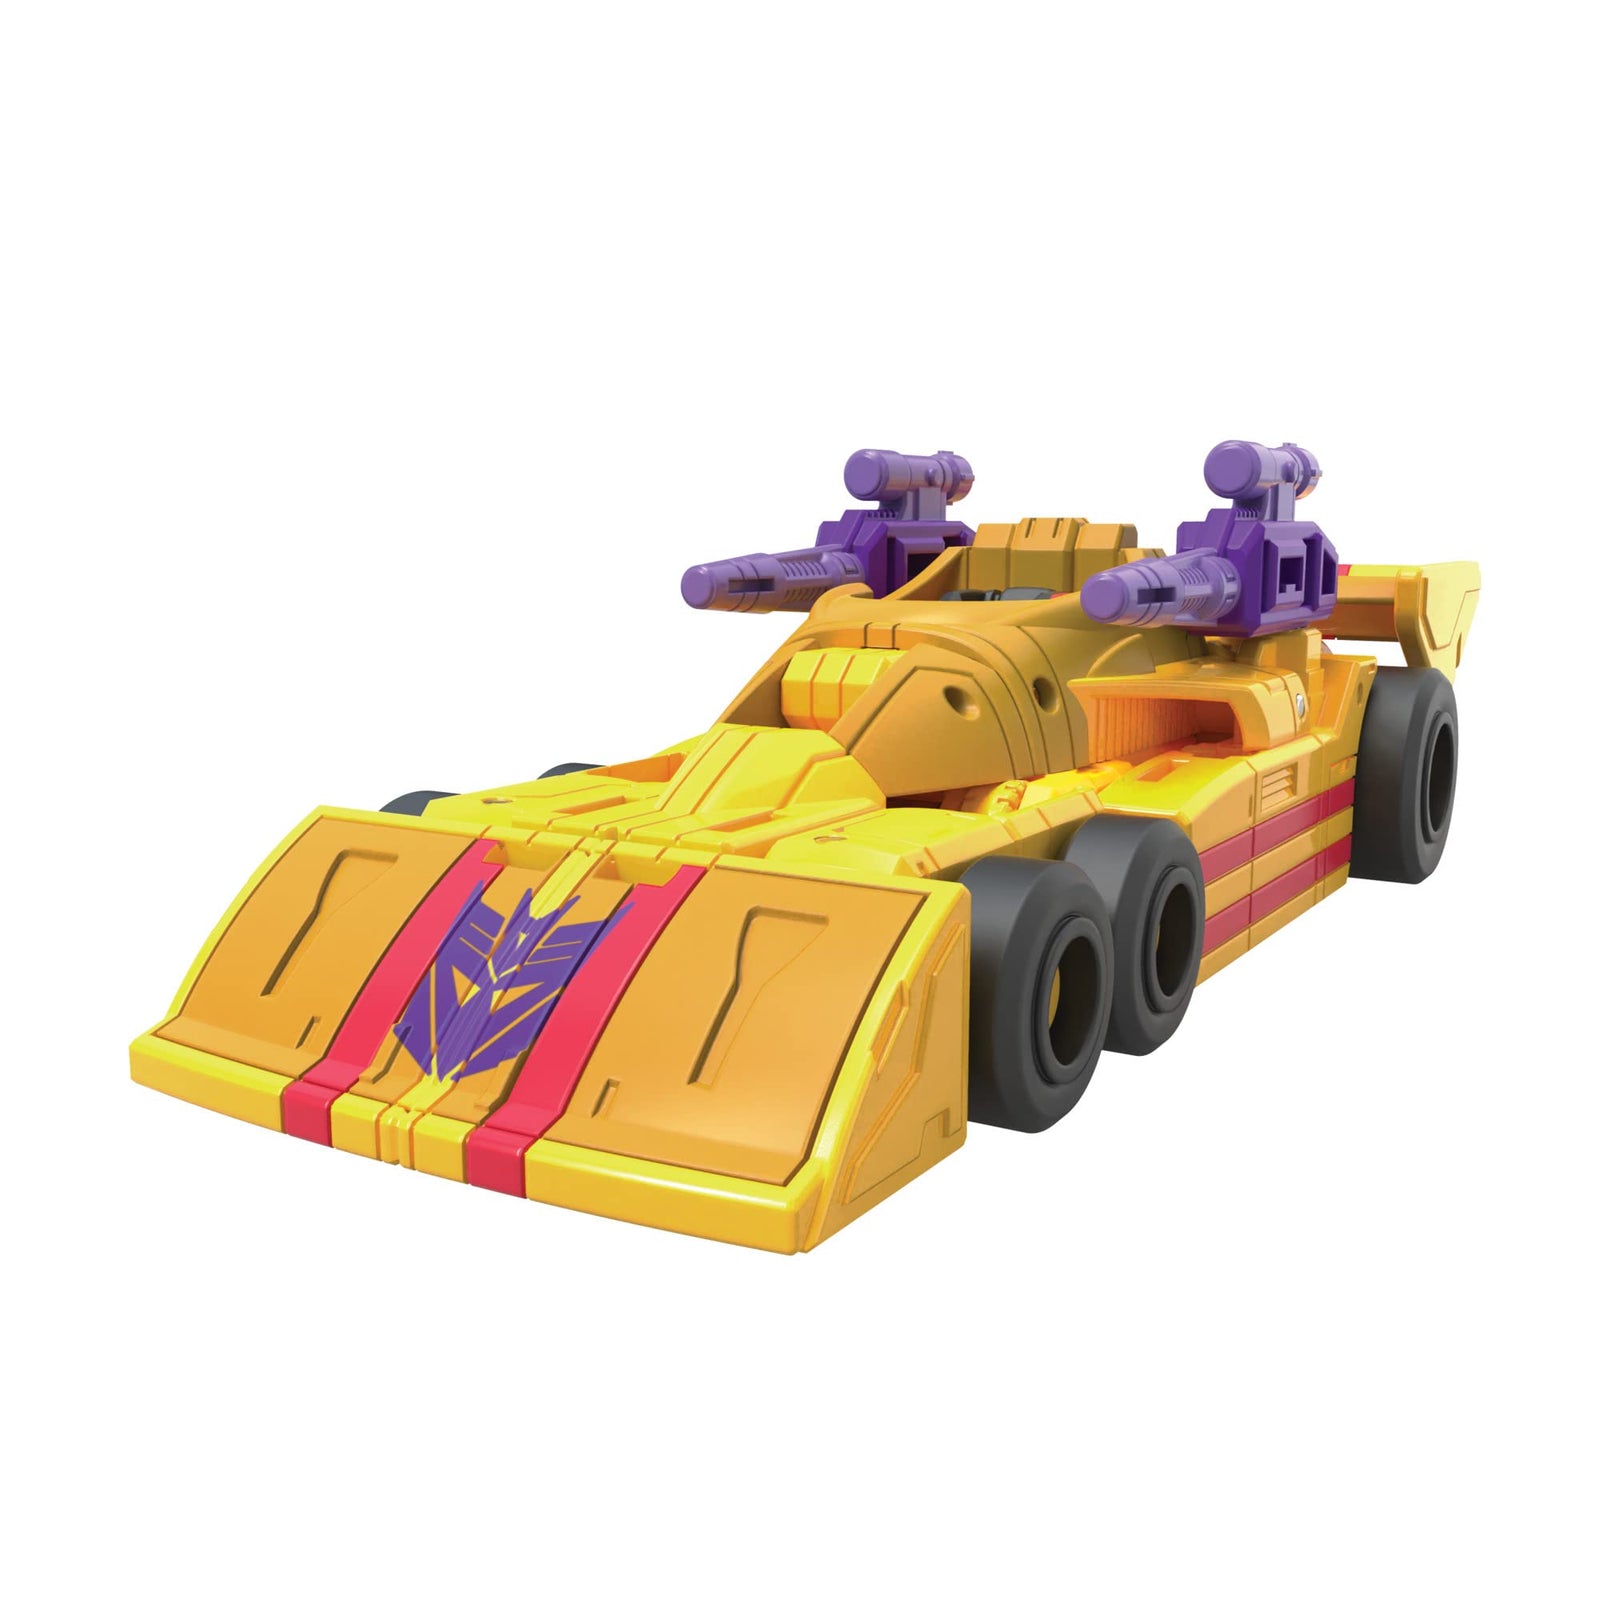 Transformers Toys Generations Legacy Deluxe Decepticon Dragstrip Action Figure - Kids Ages 8 and Up, 5.5-inch